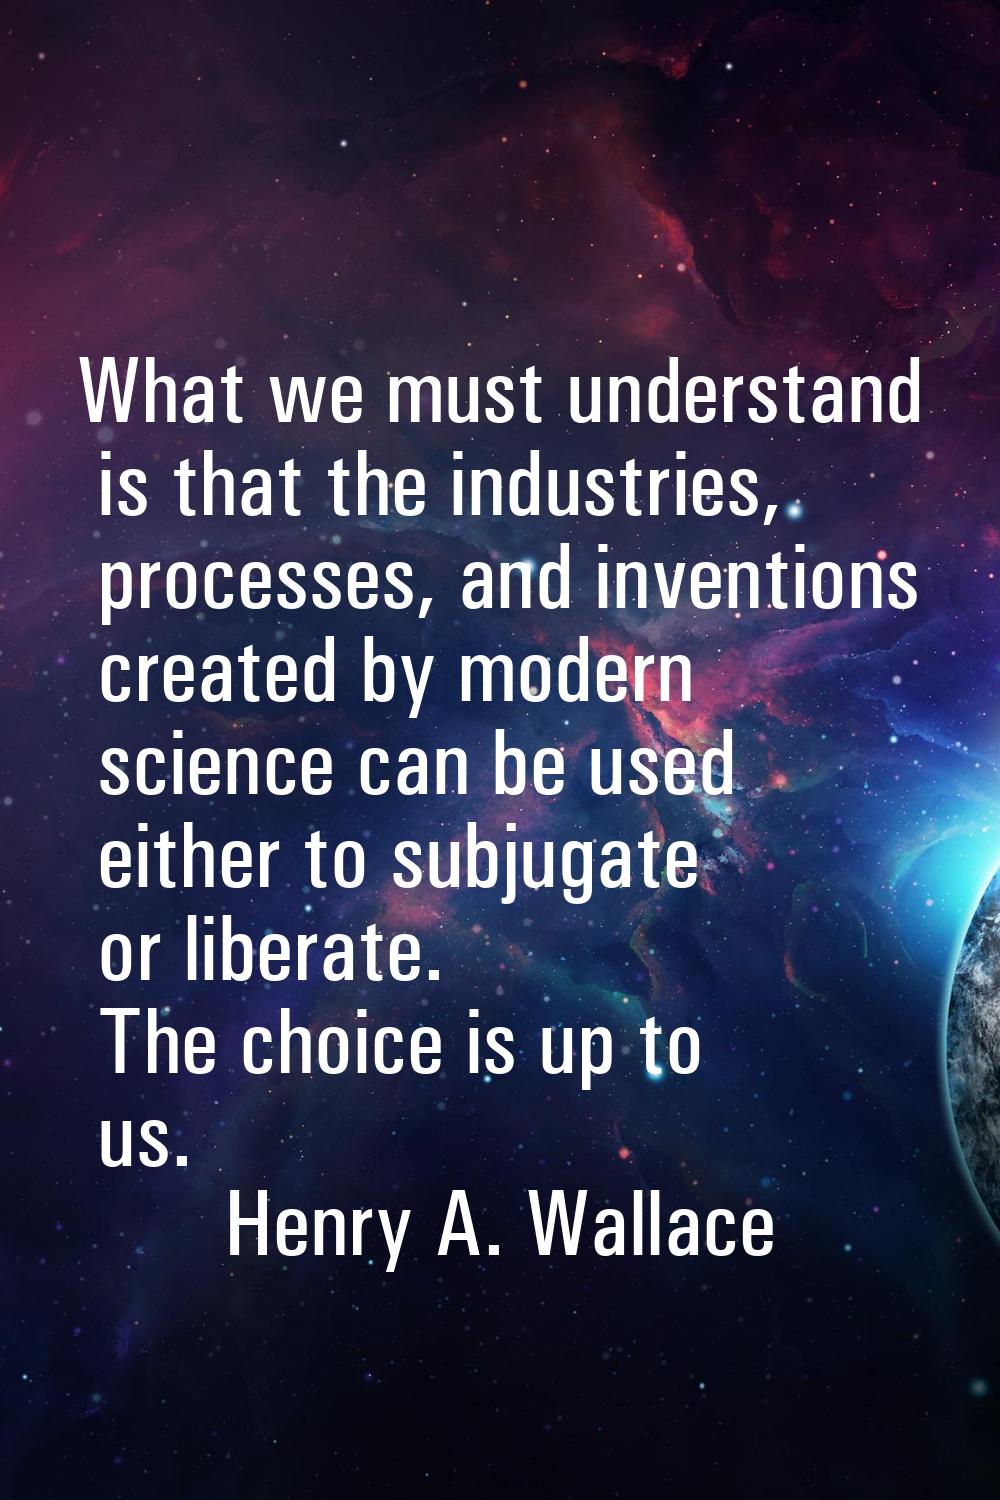 What we must understand is that the industries, processes, and inventions created by modern science